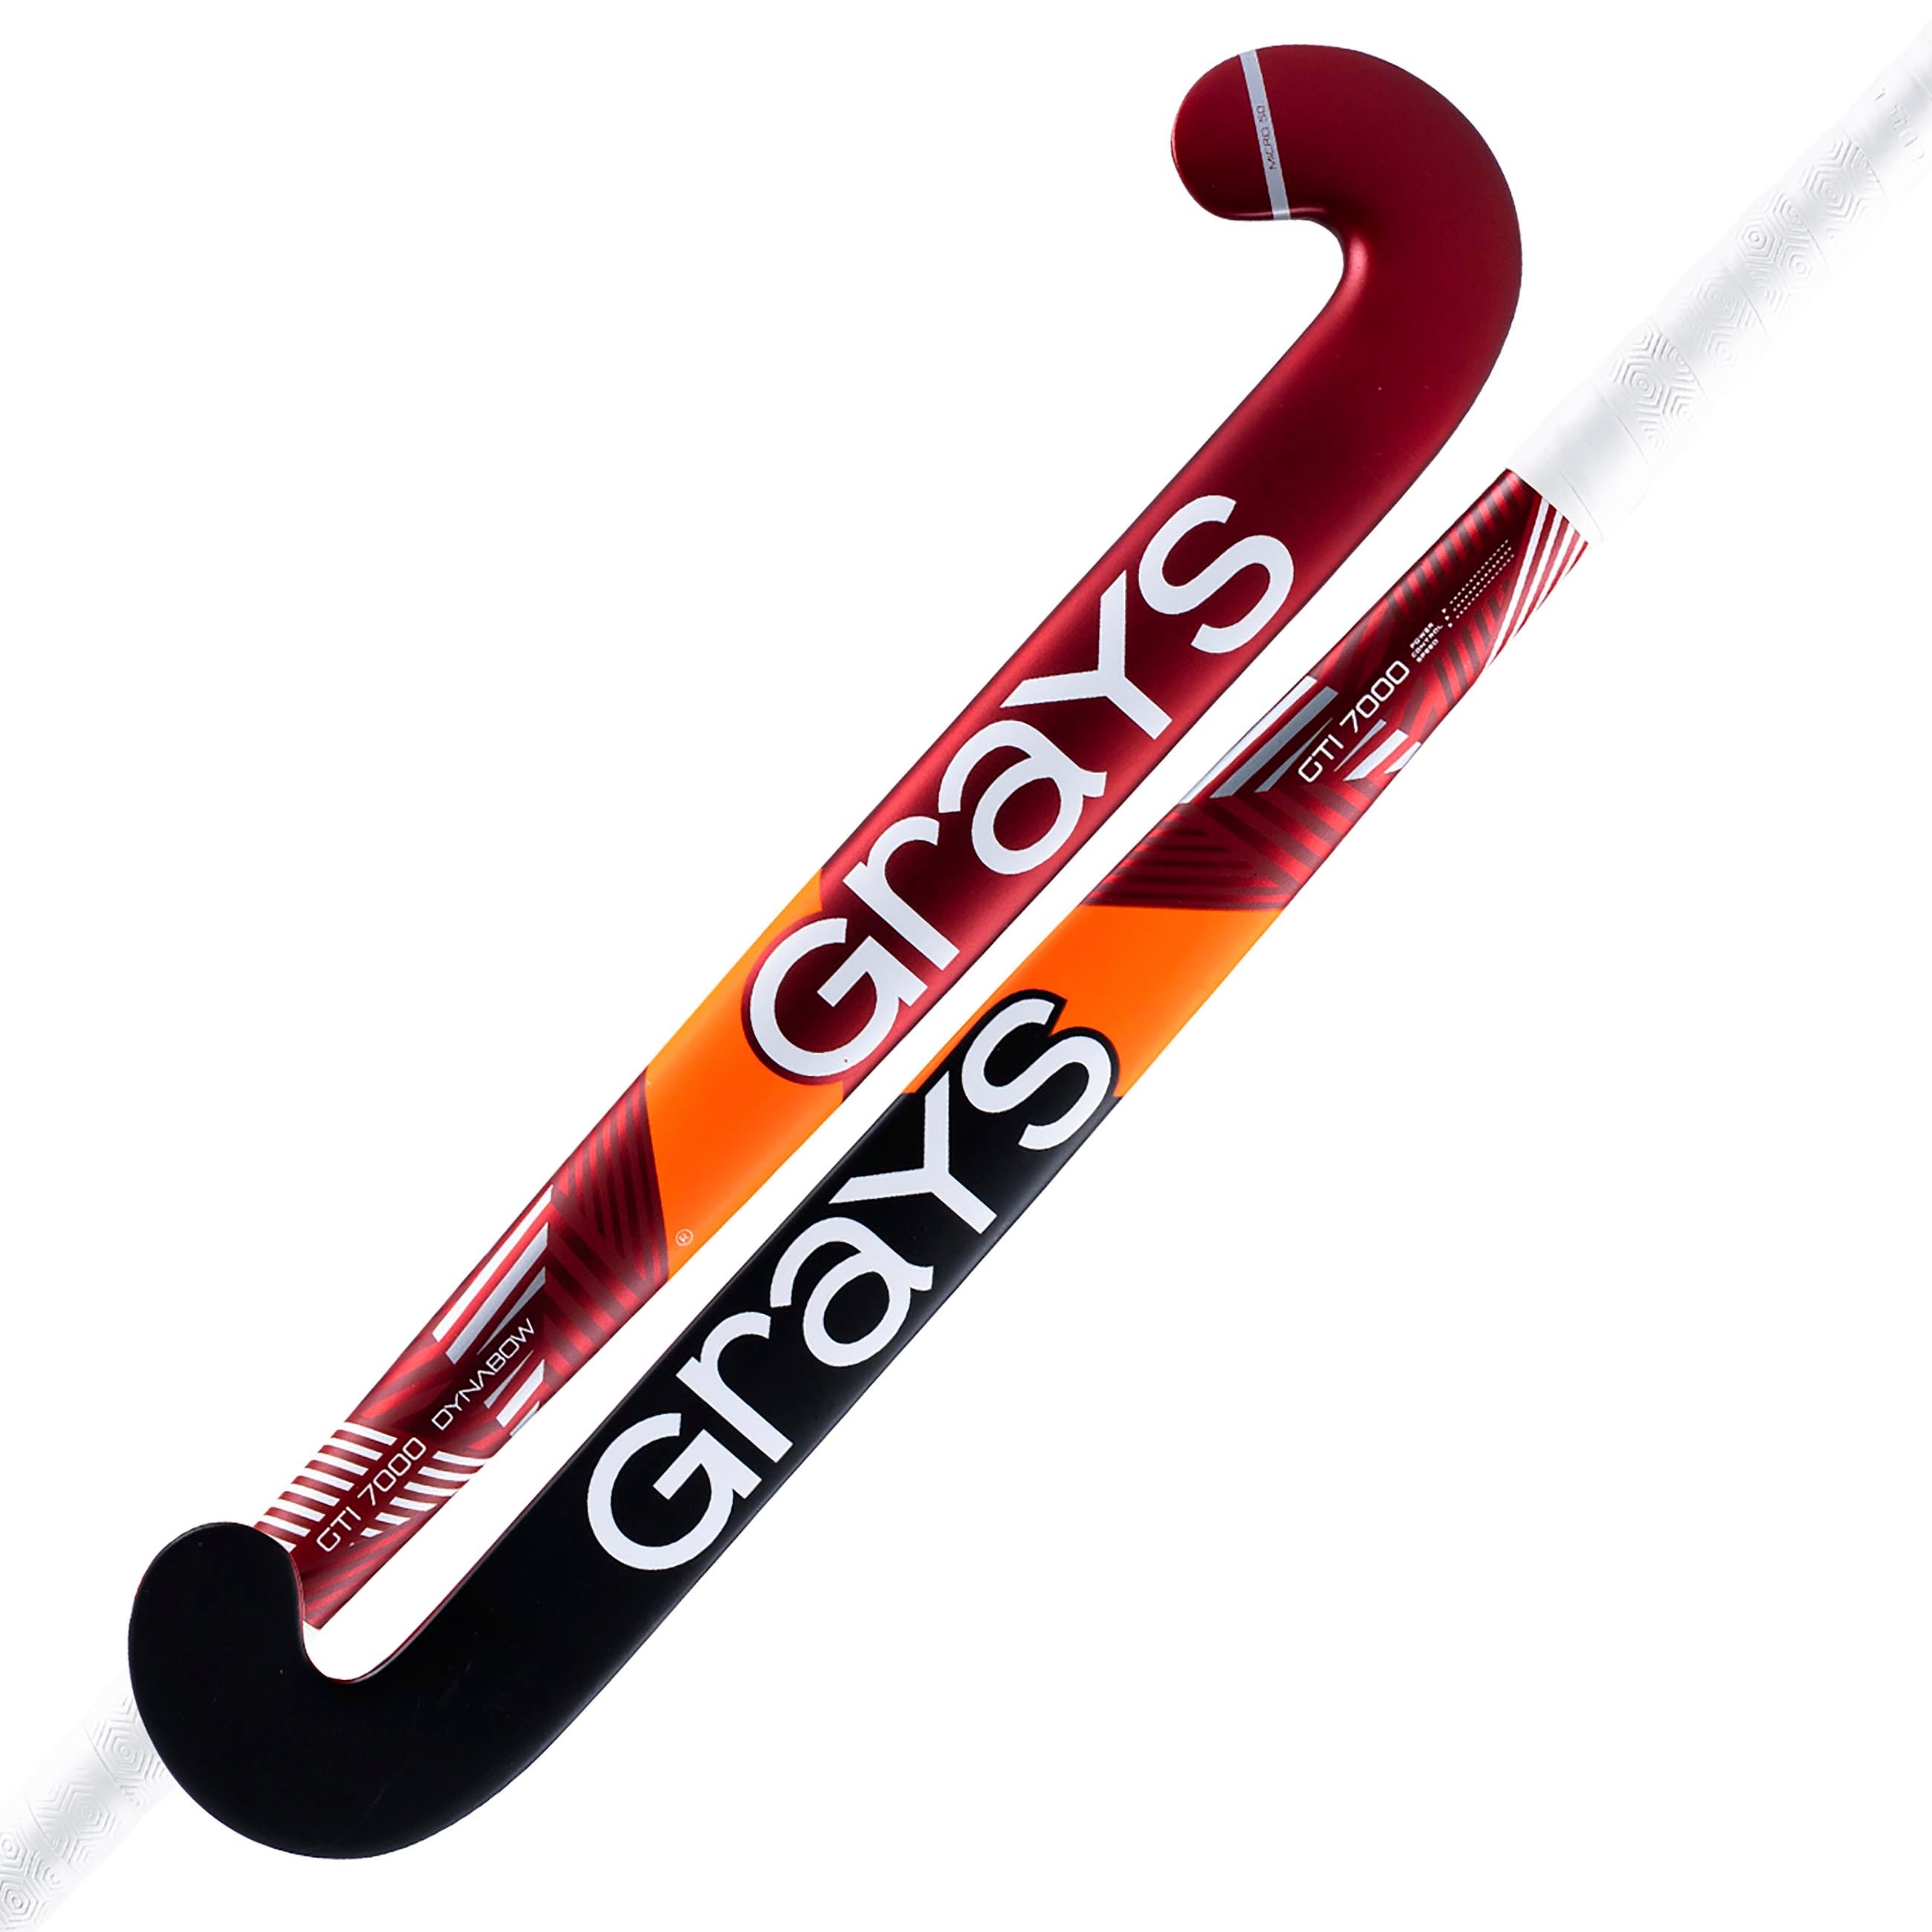 GTi7000 Dynabow Composite Indoor Hockey Stick